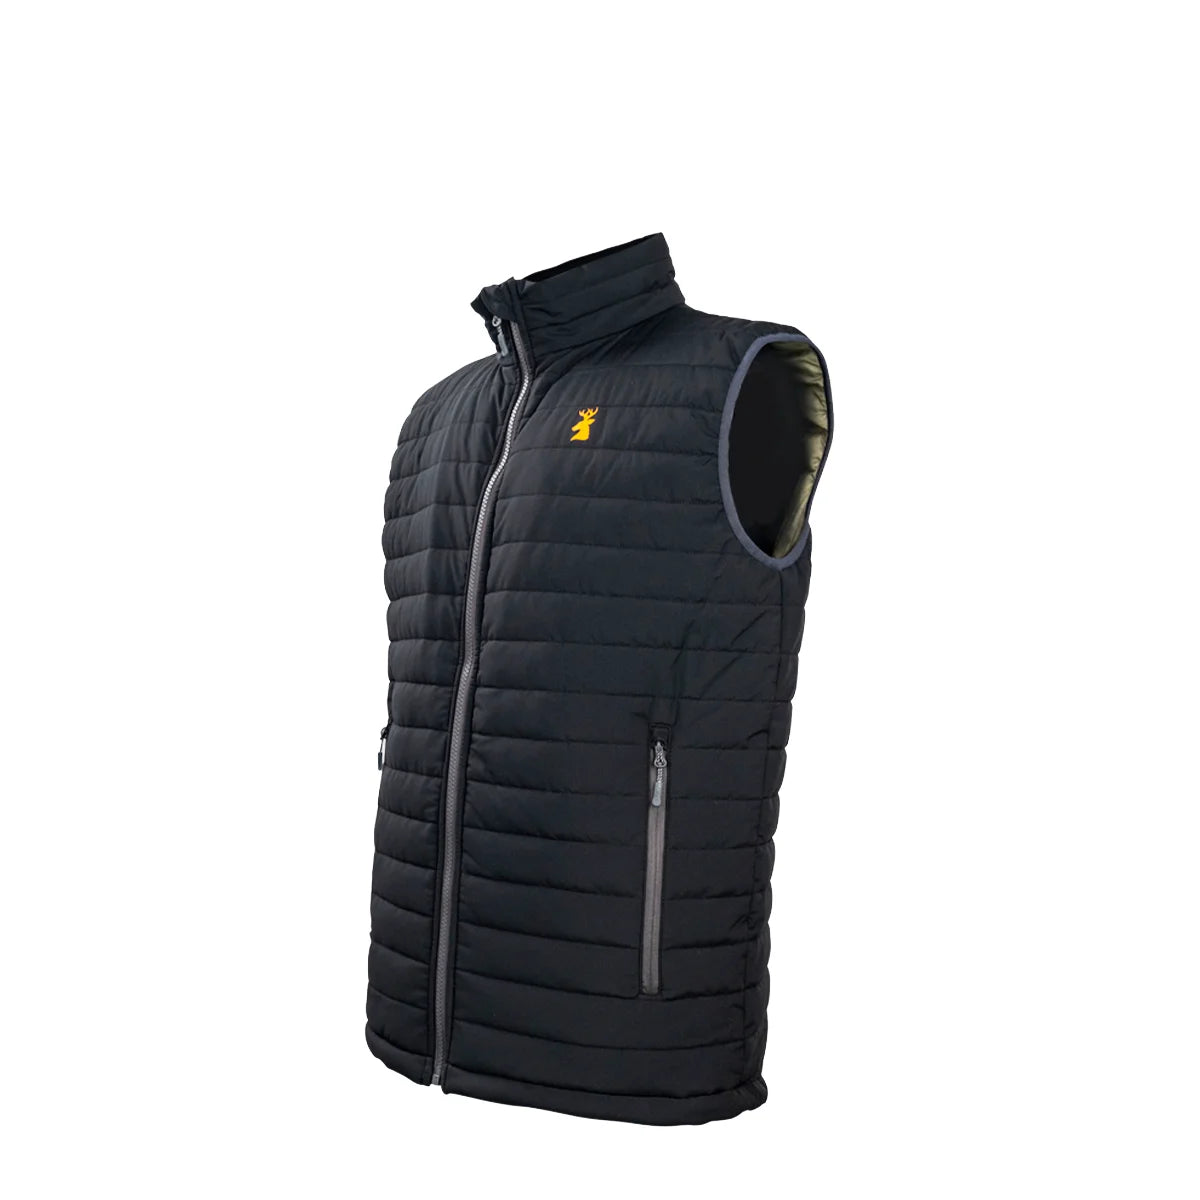 Spika Mens GO Chase Vest -  - Mansfield Hunting & Fishing - Products to prepare for Corona Virus